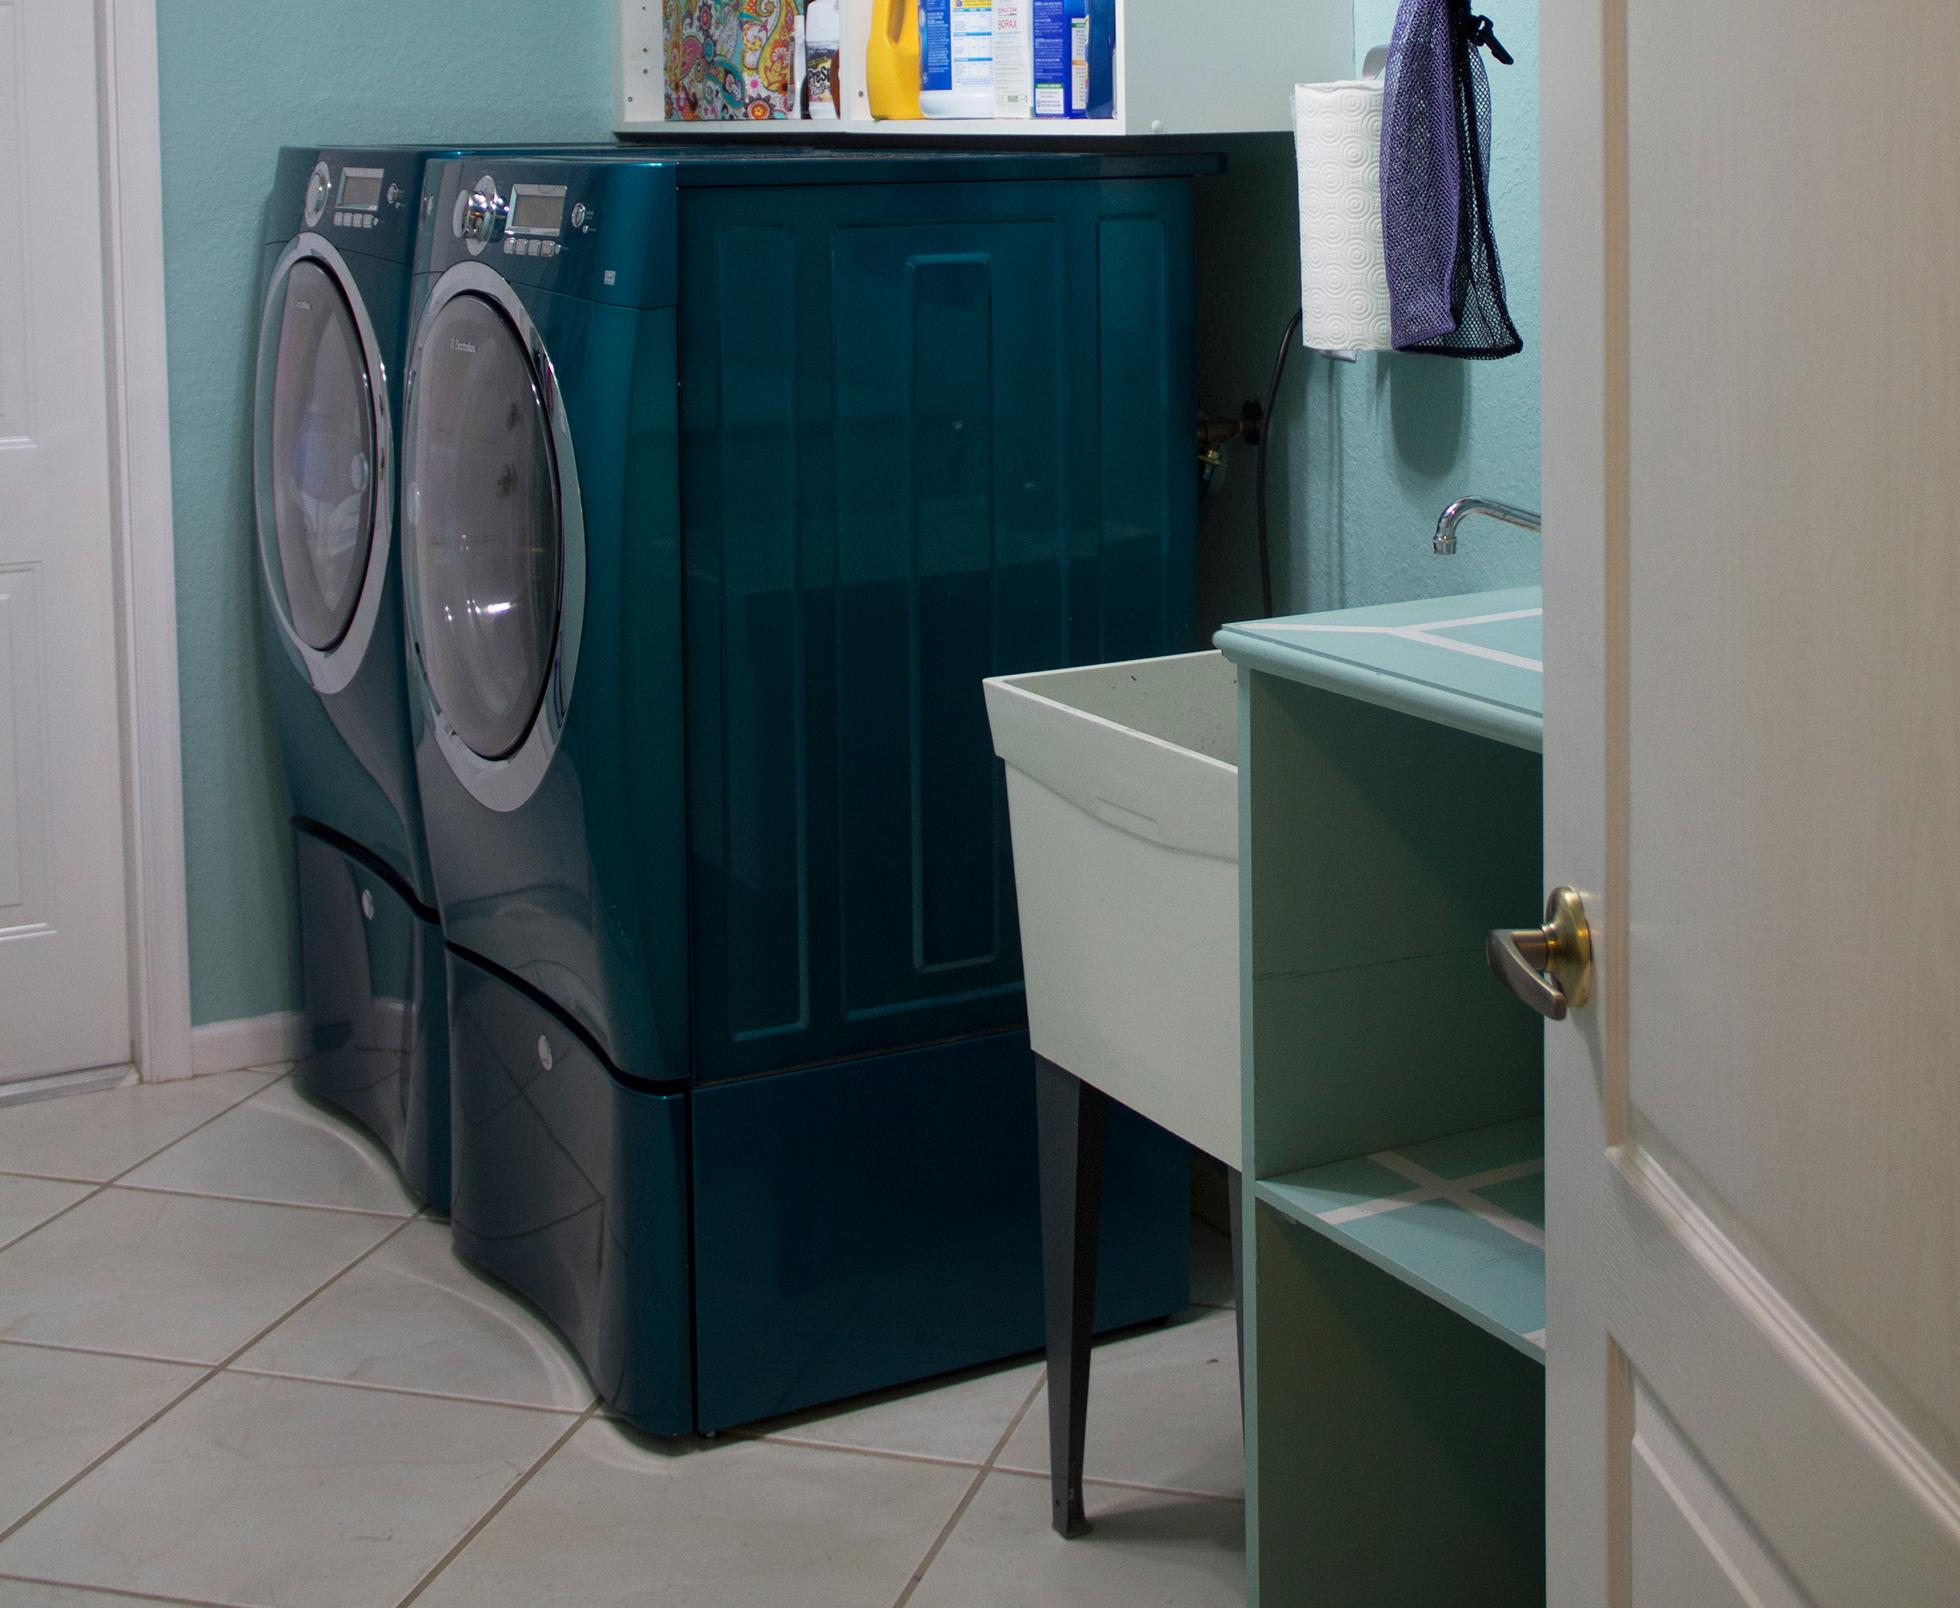 A teal washer and dryer combo in a light-blue laundry room